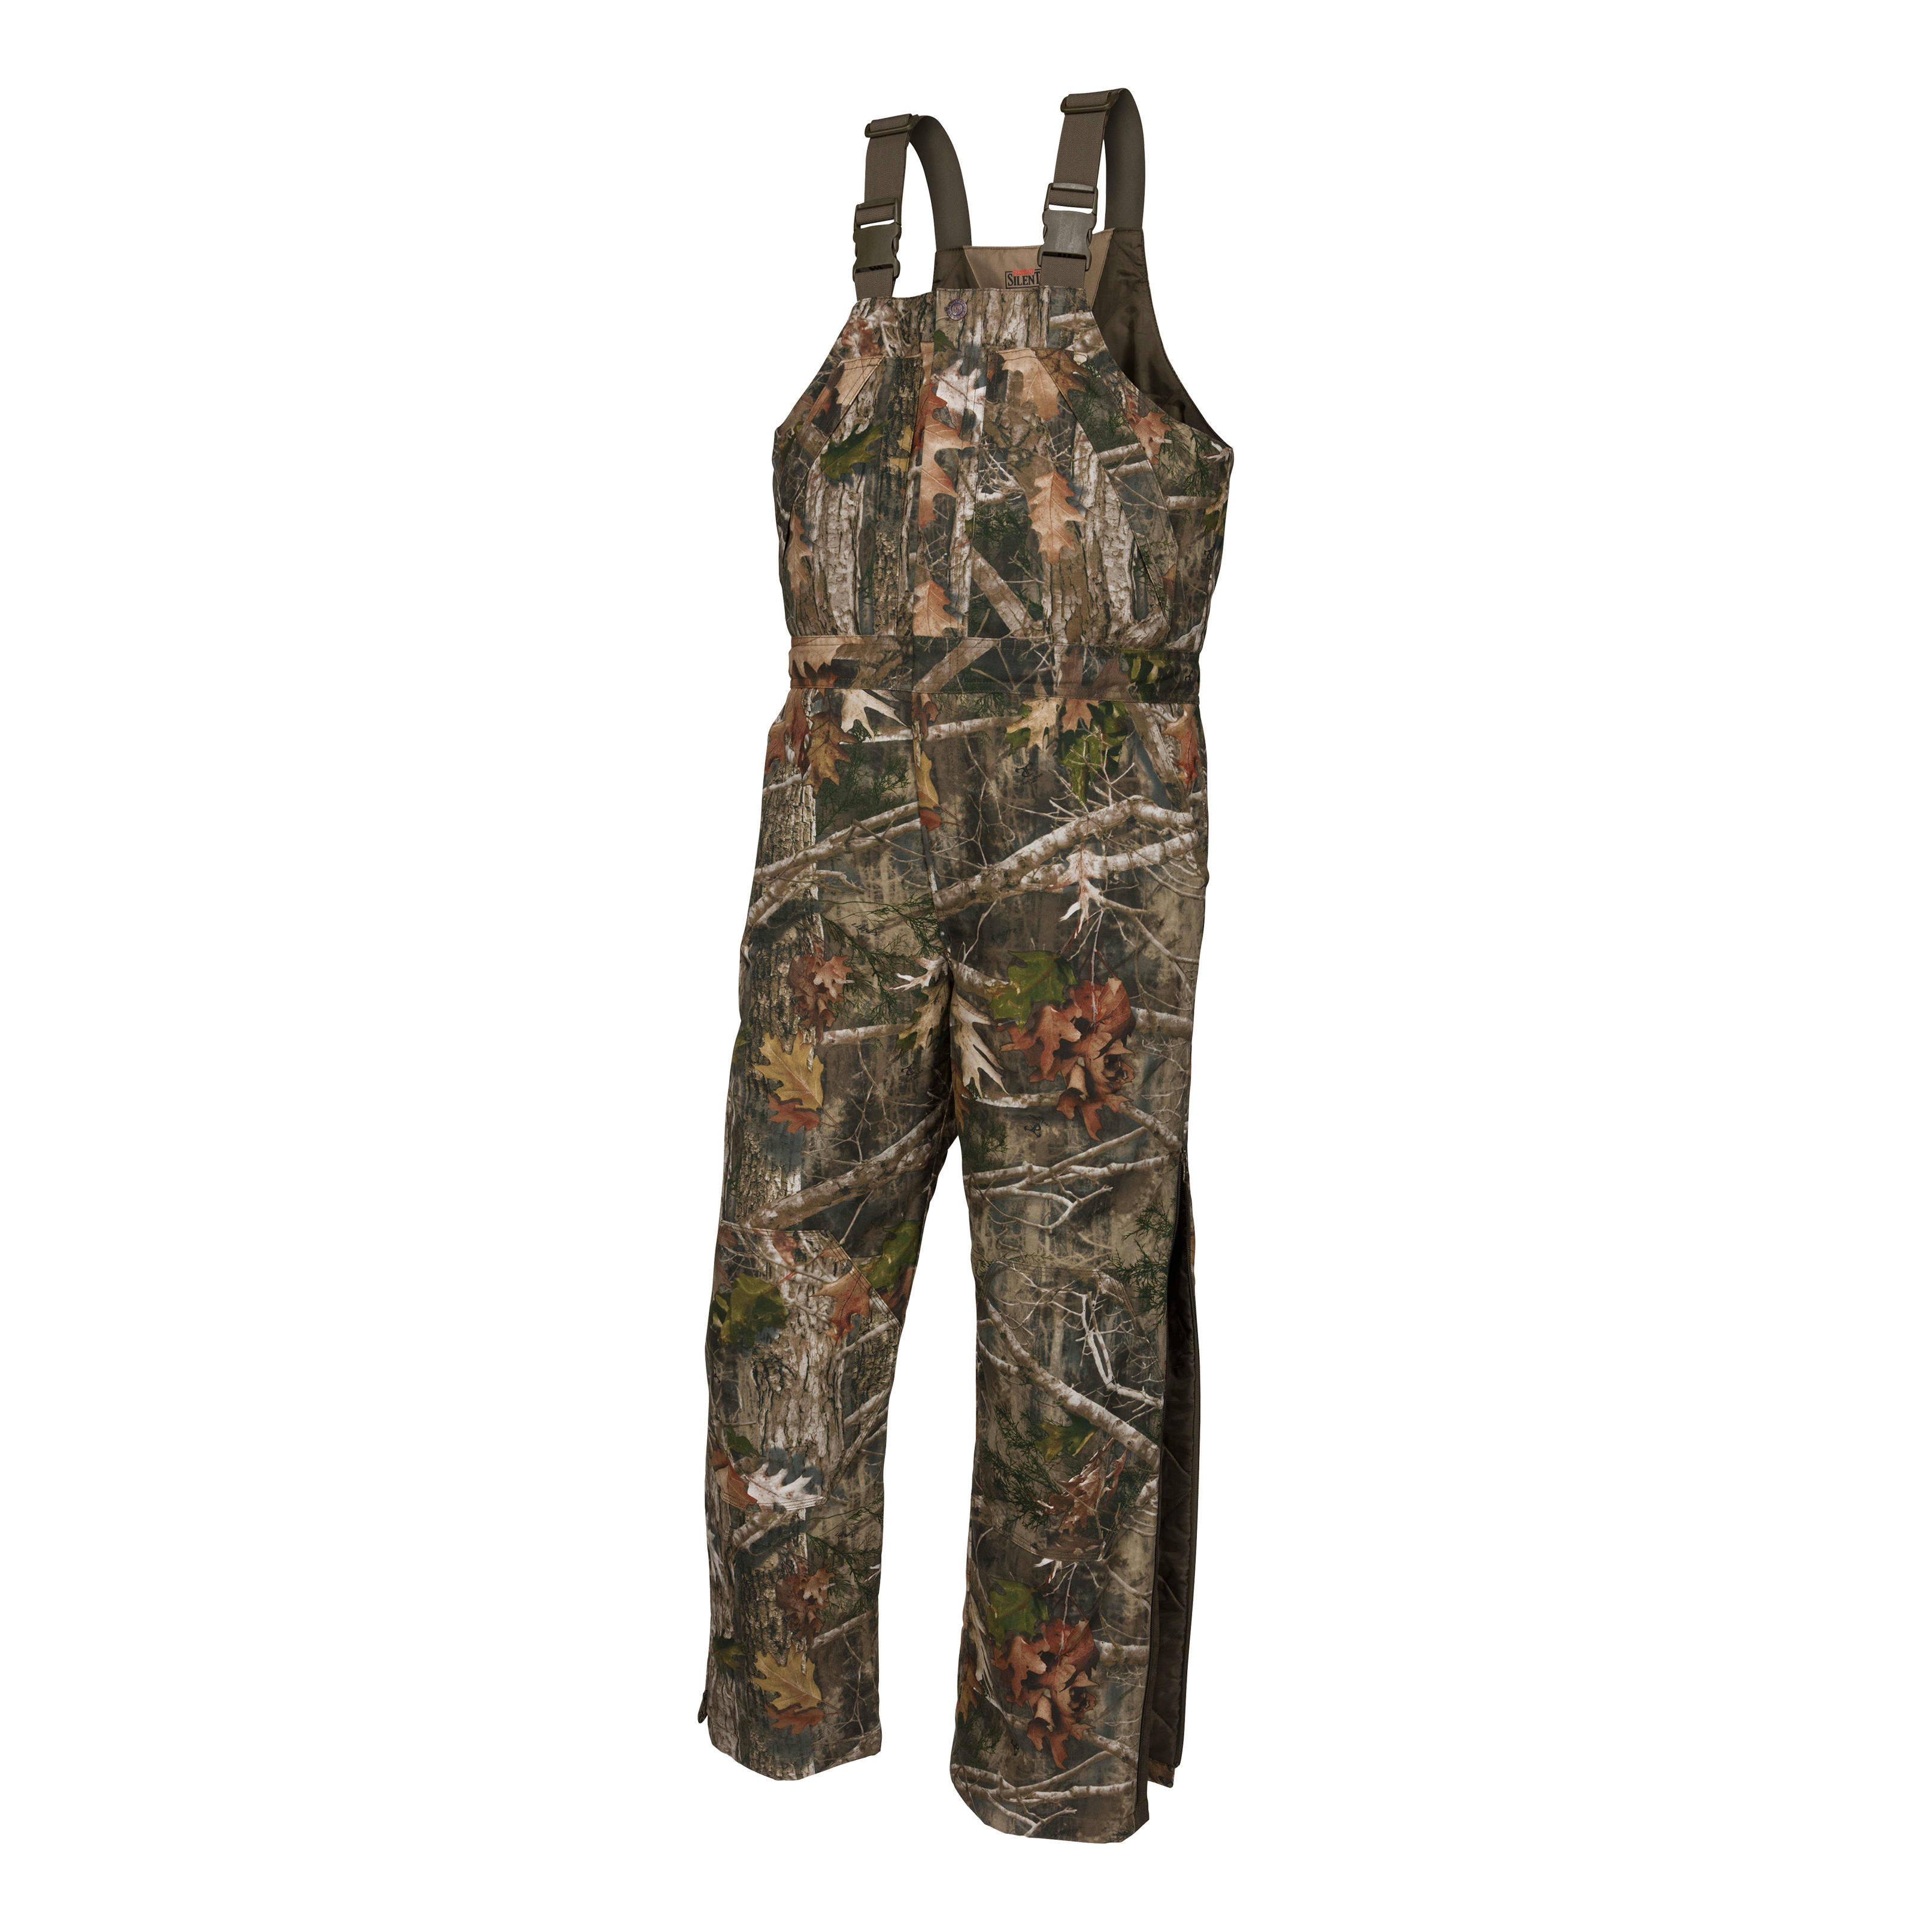 RedHead Men’s Insulated Silent-Hide Bibs - Cabelas - REDHEAD - Cold